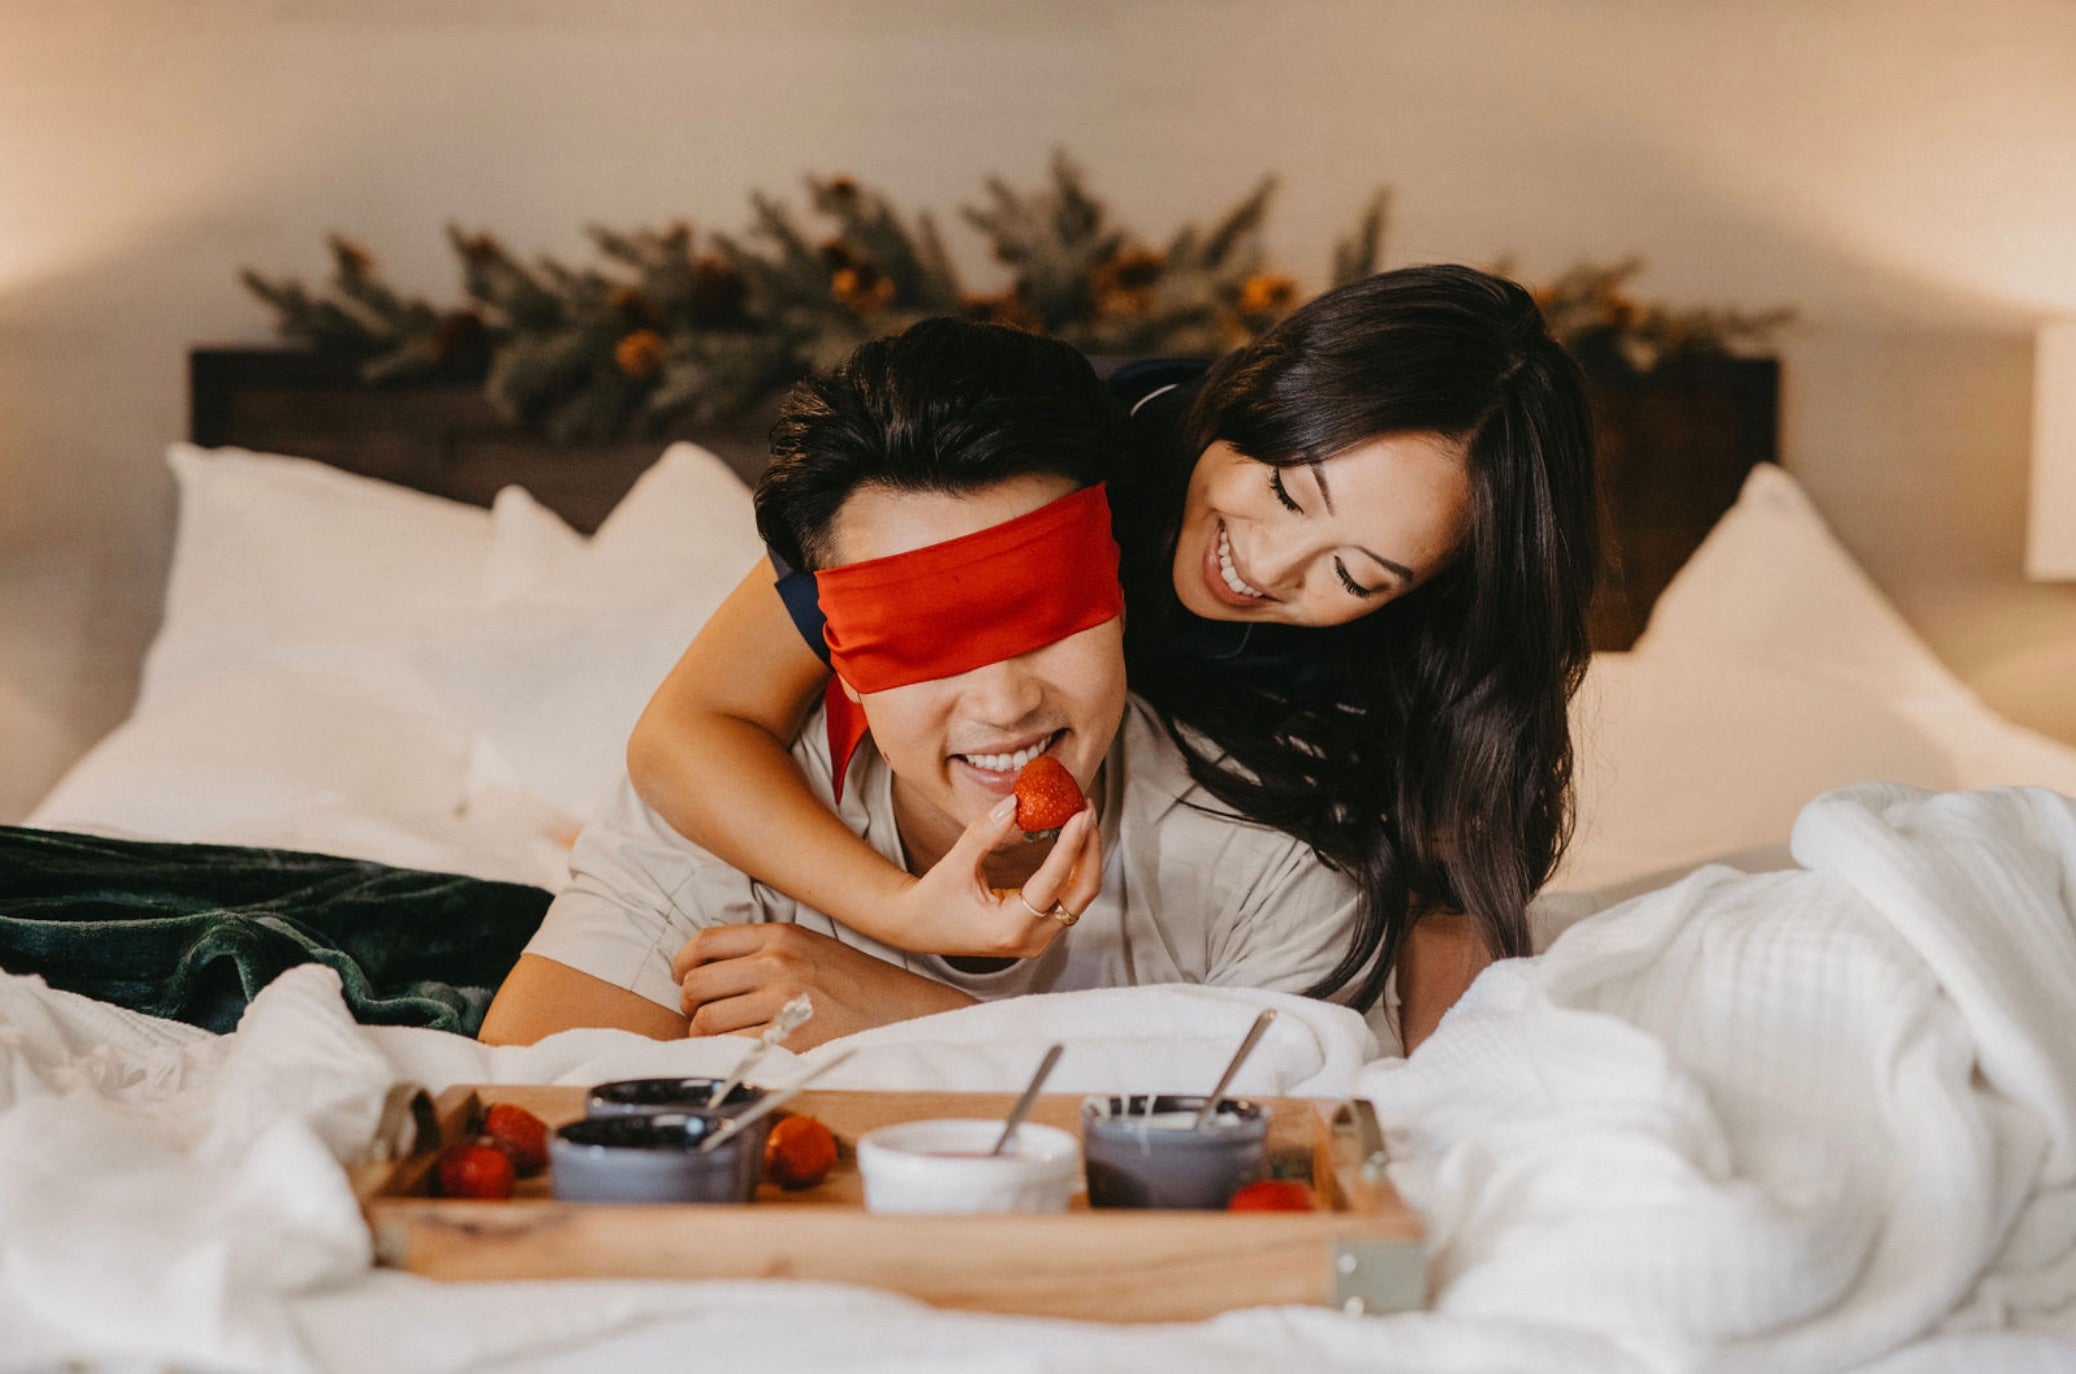 Ideas for Surprise Gifts for your Husband The Adventure Challenge